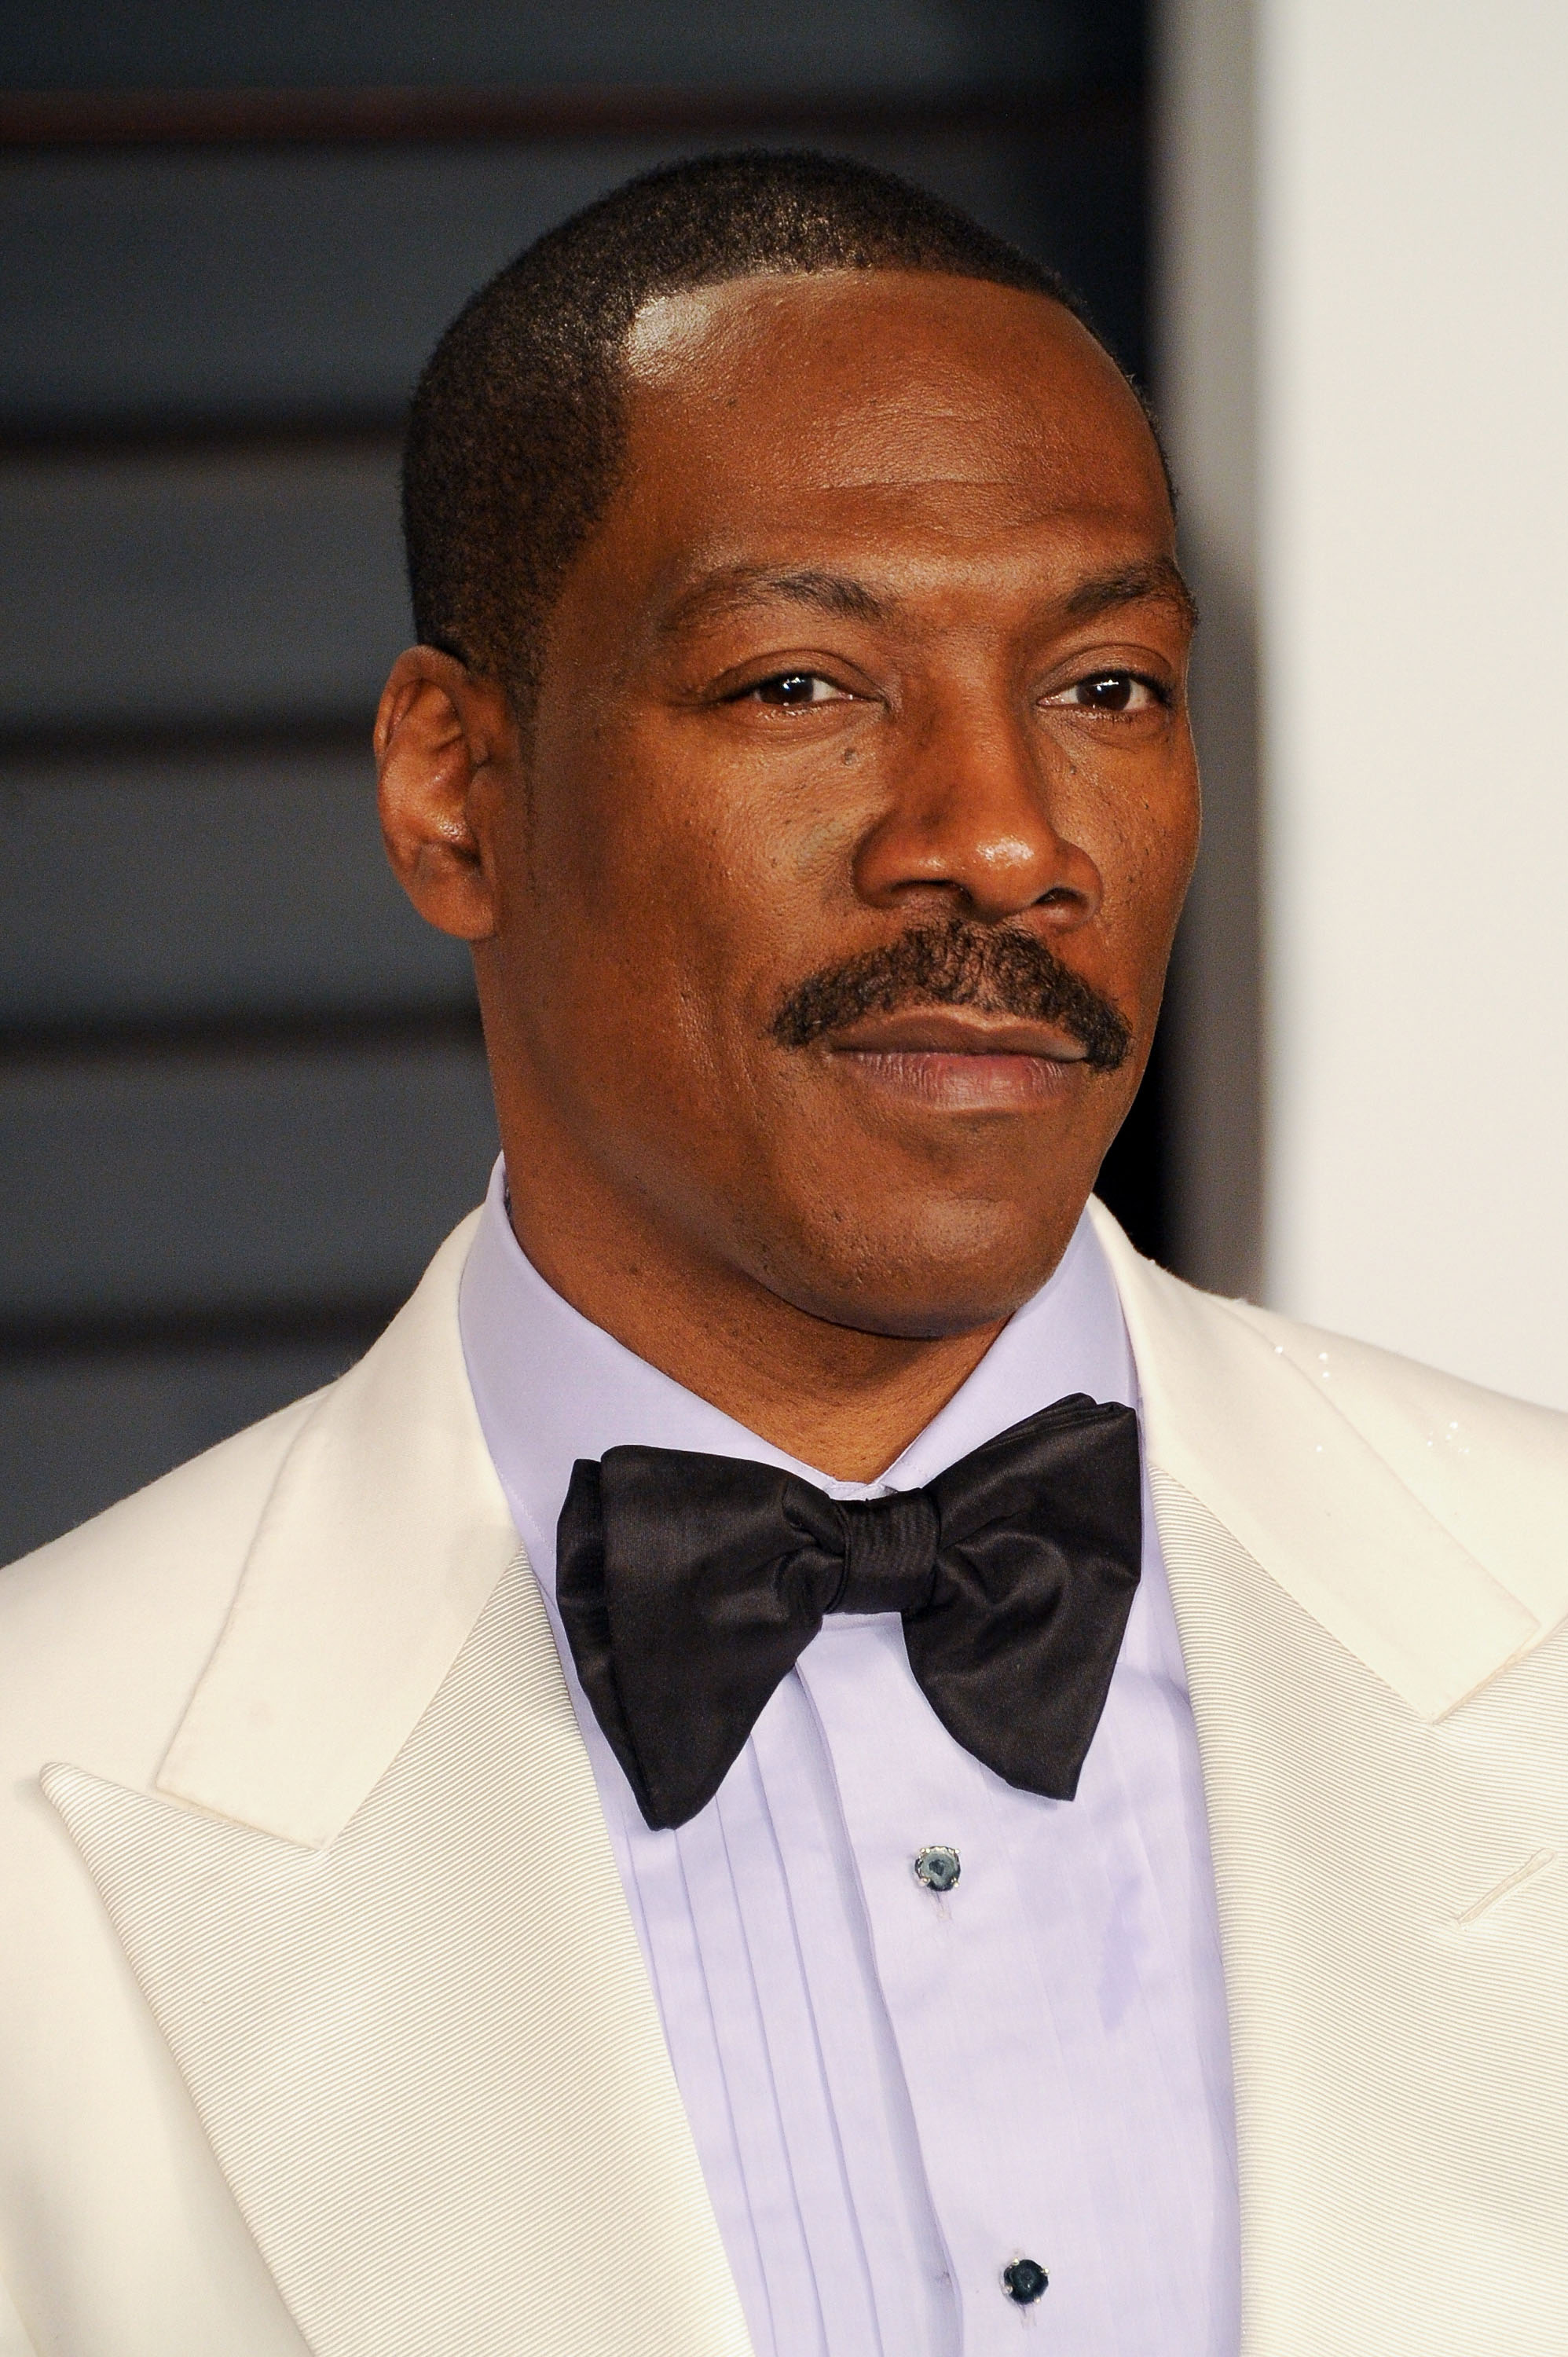 Eddie Murphy at the 2015 Vanity Fair Oscar Party in Beverly Hills, Calif. on Feb. 22, 2015. (Allen Berezovsky—Getty Images)